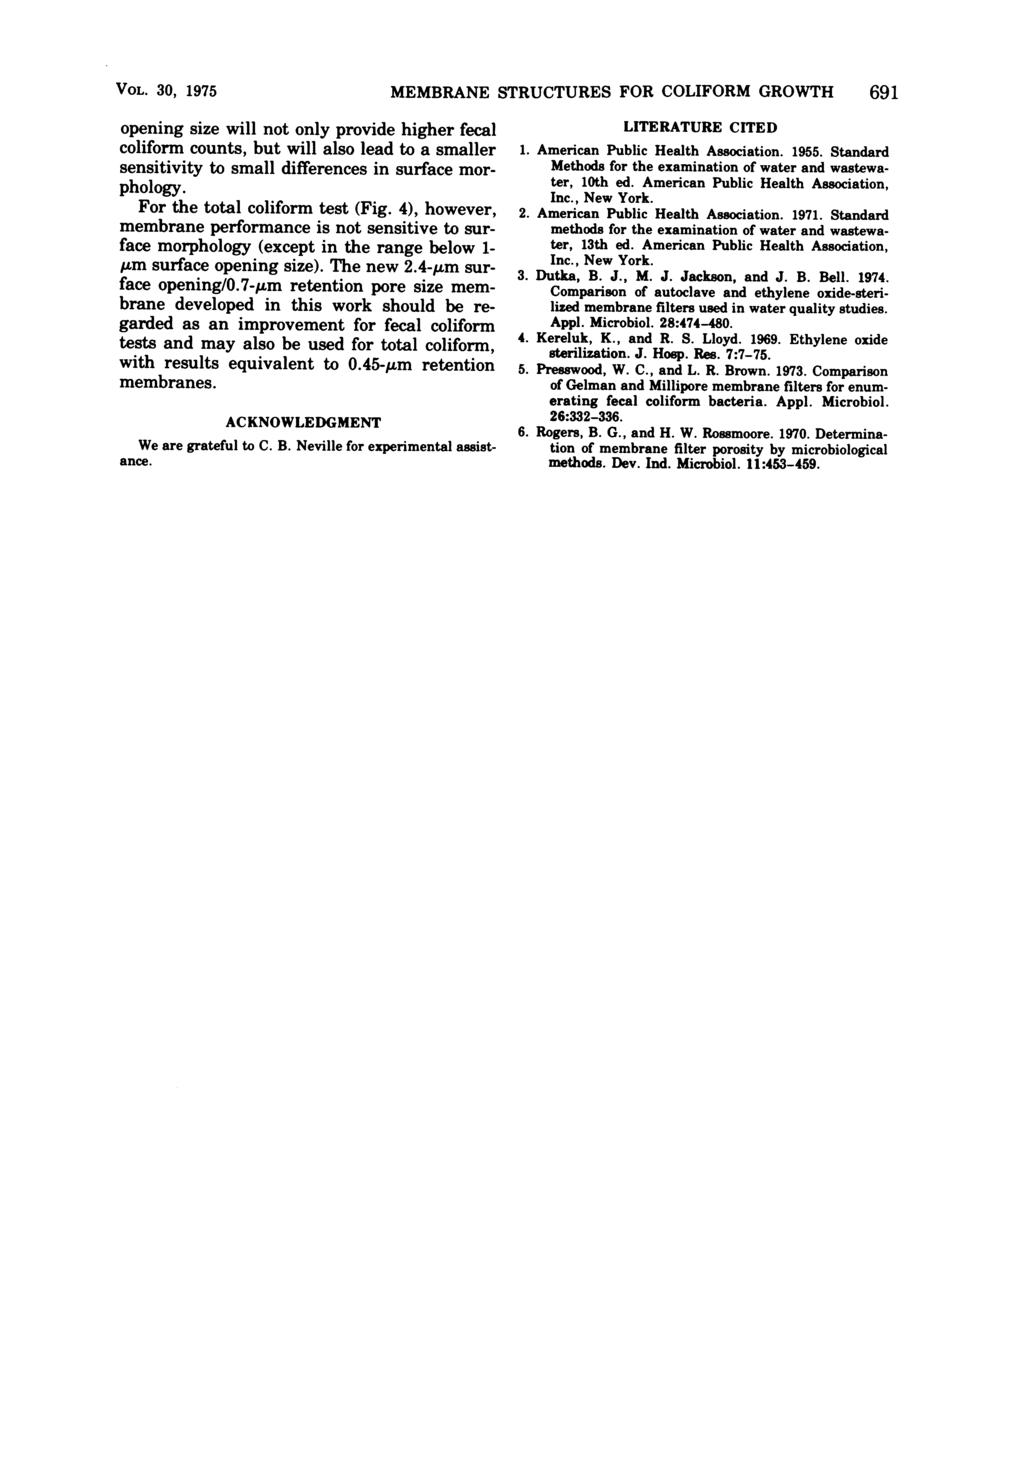 VOL. 3, 1975 opening size will not only provide higher fecal coliform counts, but will also lead to a smaller sensitivity to small differences in surface morphology. For the total coliform test (Fig.